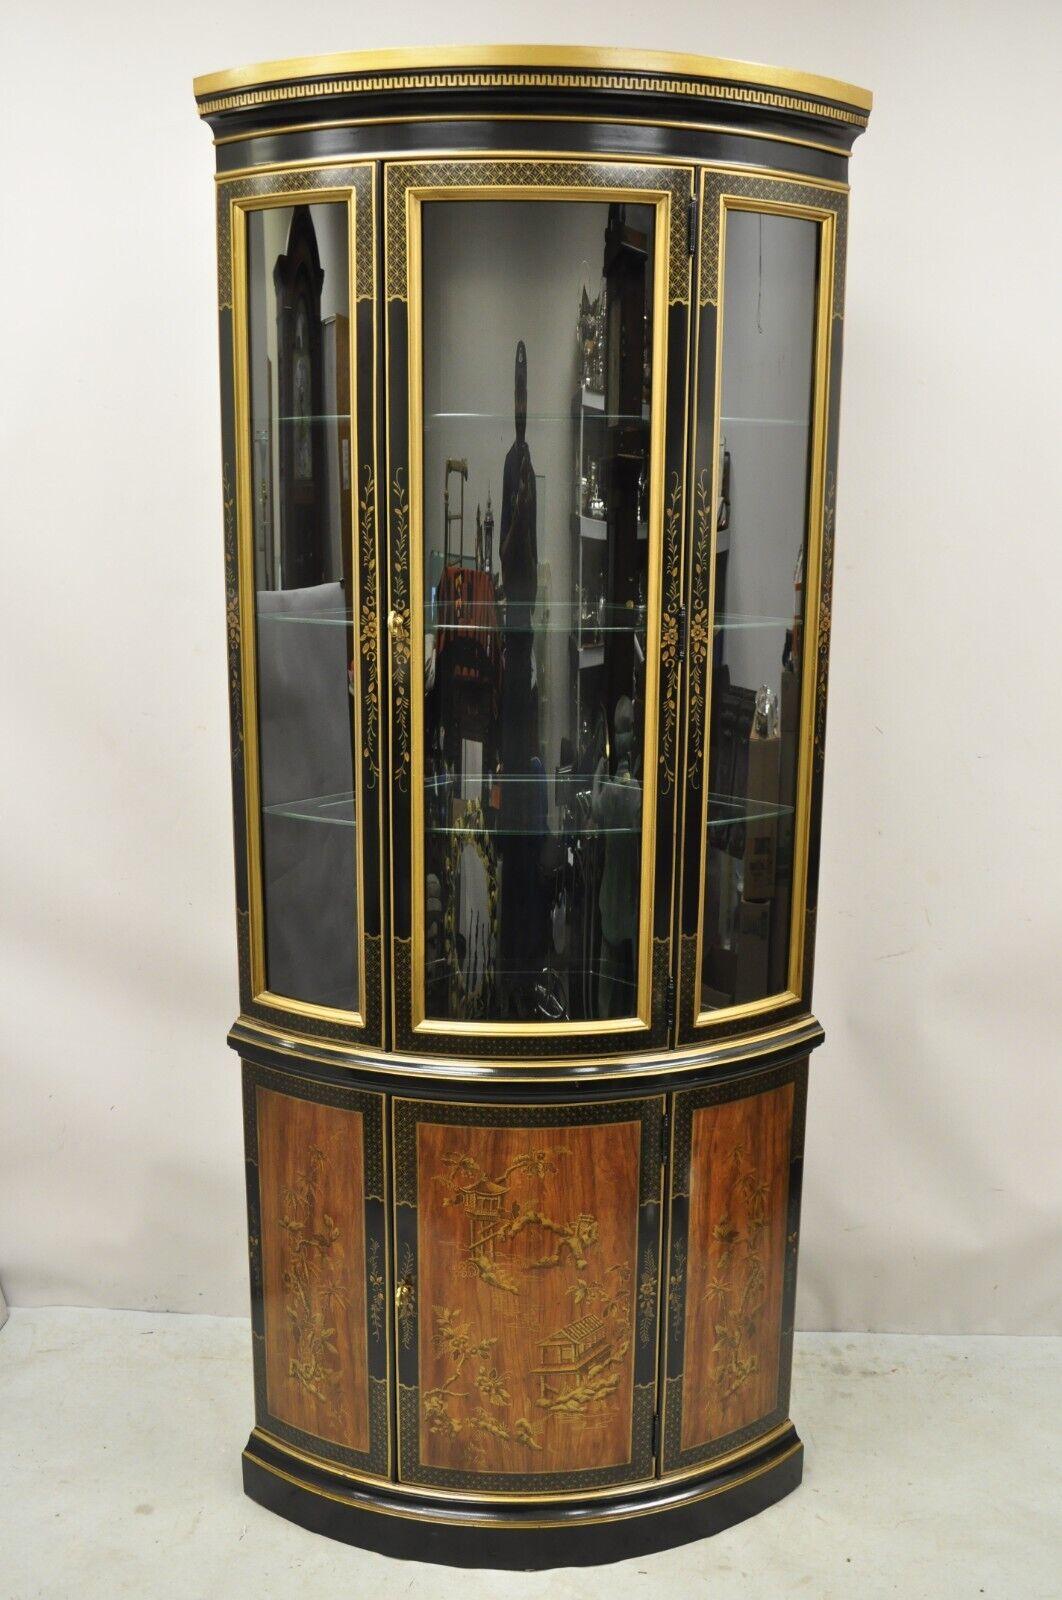 Drexel Heritage Et Cetera Black and Gold Chinoiserie Bow Front China Display Cabinet. Item featured has hand painted details, lighted interior, bowed front, original label, quality American craftsmanship. Circa Mid 20th Century. Measurements: 78